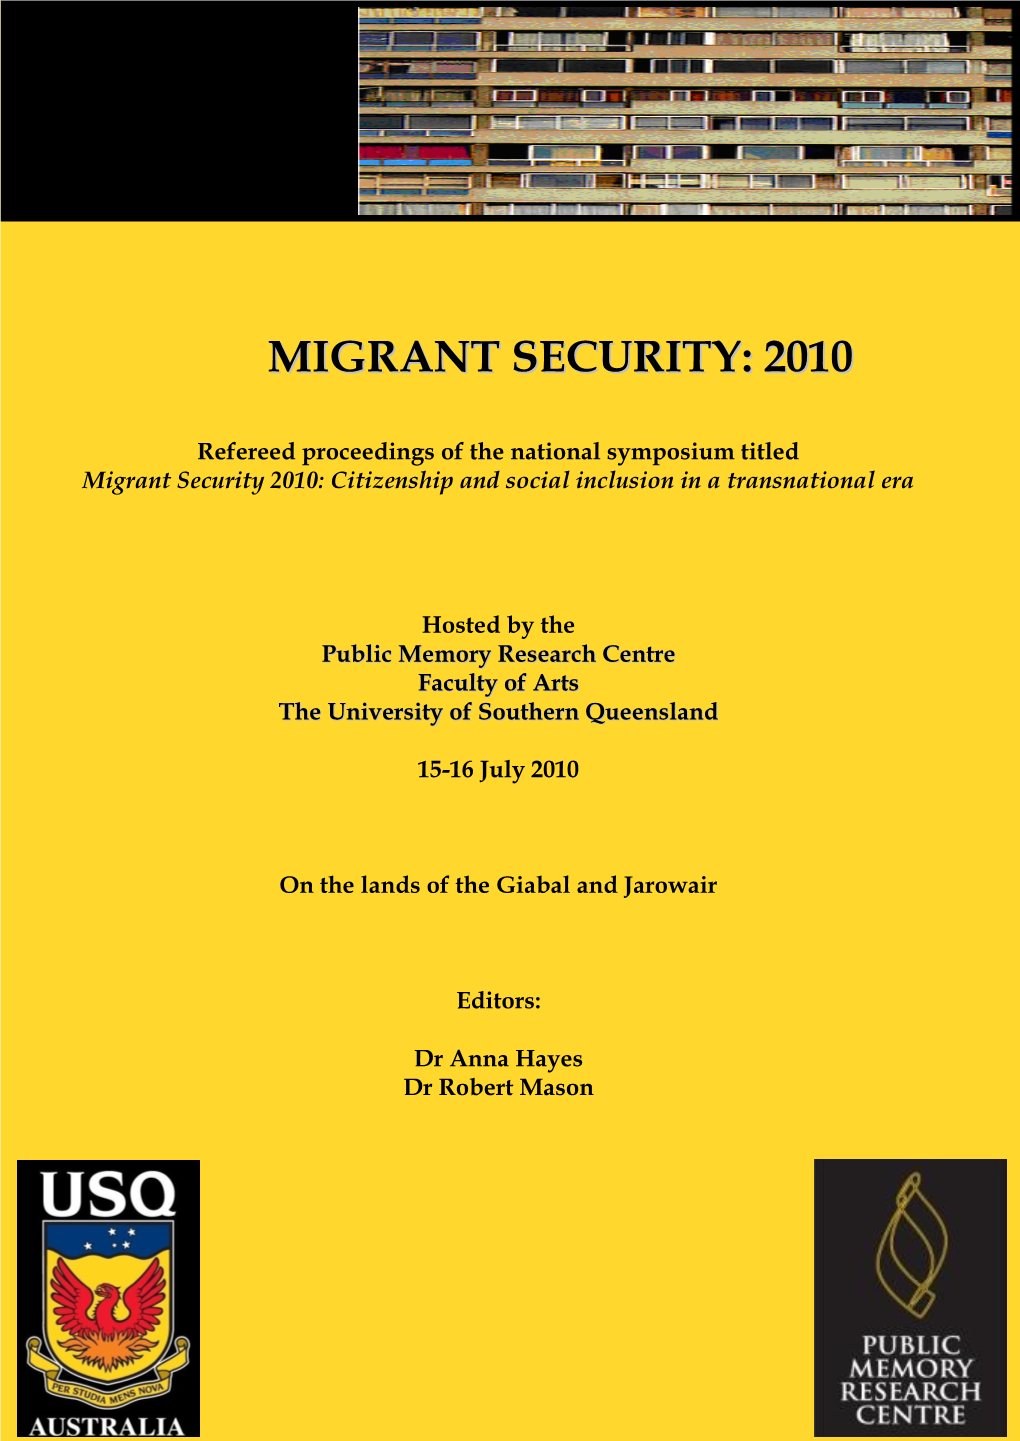 Migrant Security 2010: Citizenship and Social Inclusion in a Transnational Era